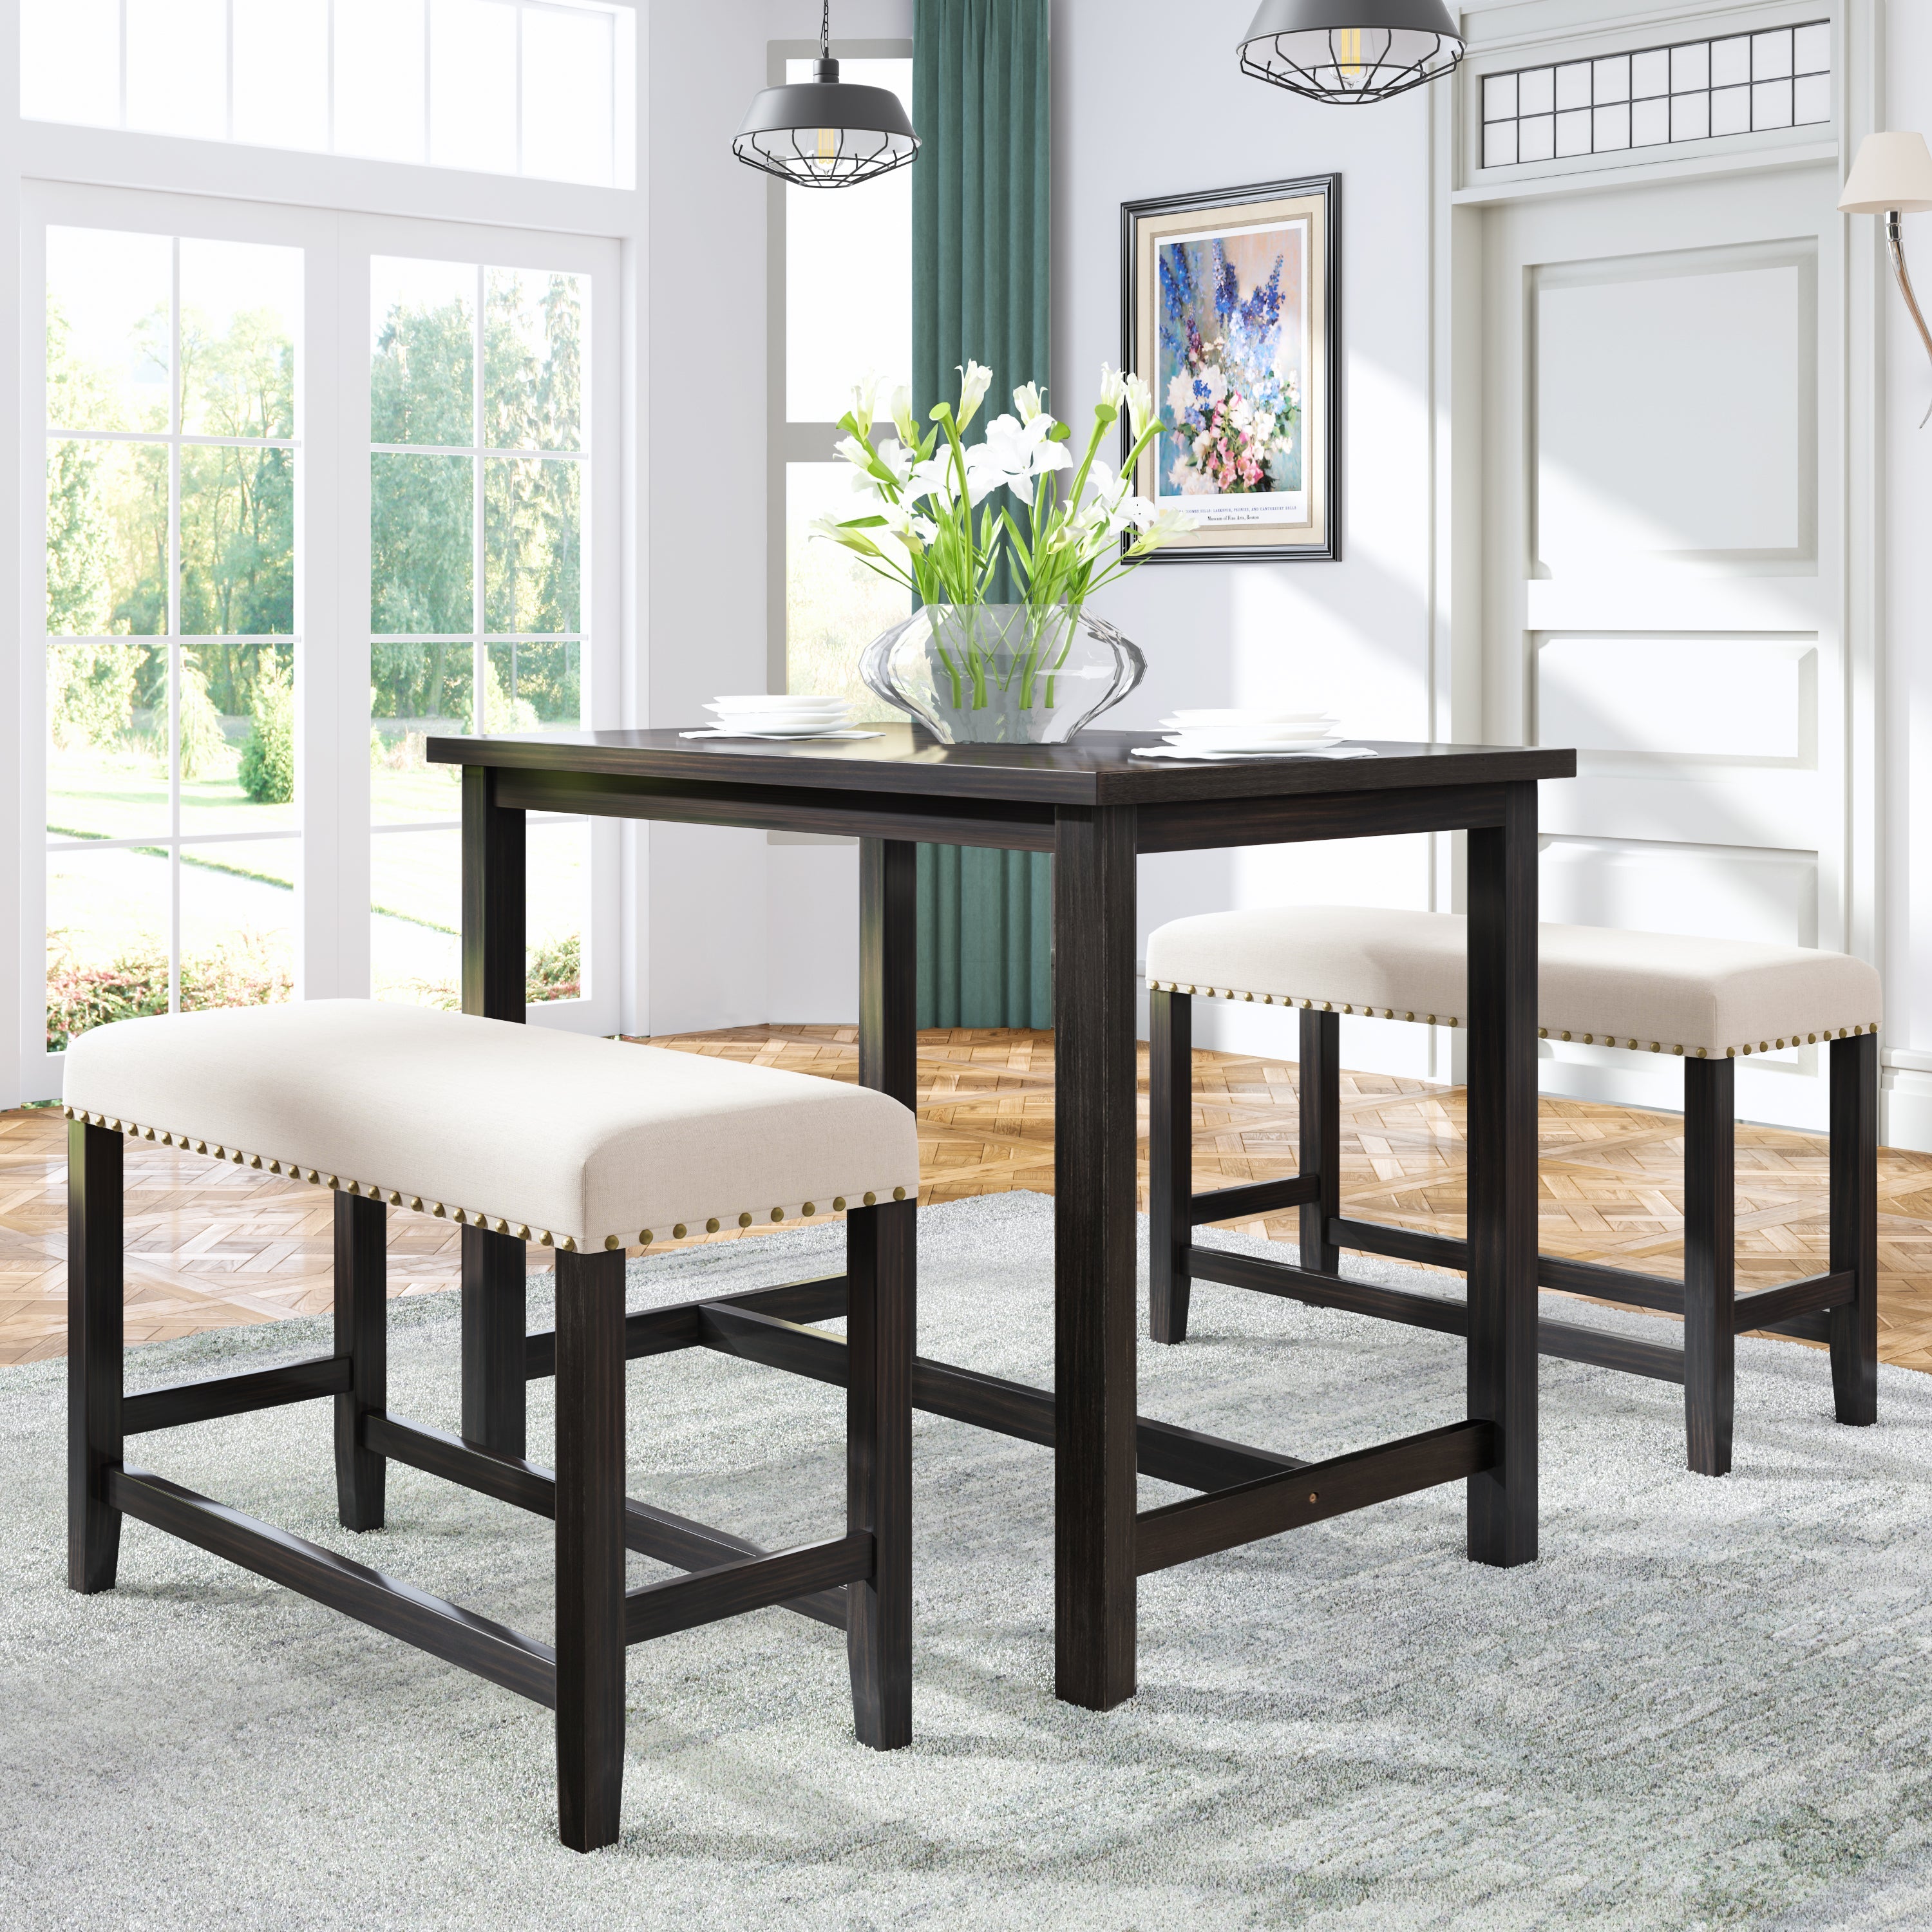 3 Pieces Rustic Wooden Counter Height Dining Table Set with 2 Upholstered Benches for Small Places Espresso+ Beige